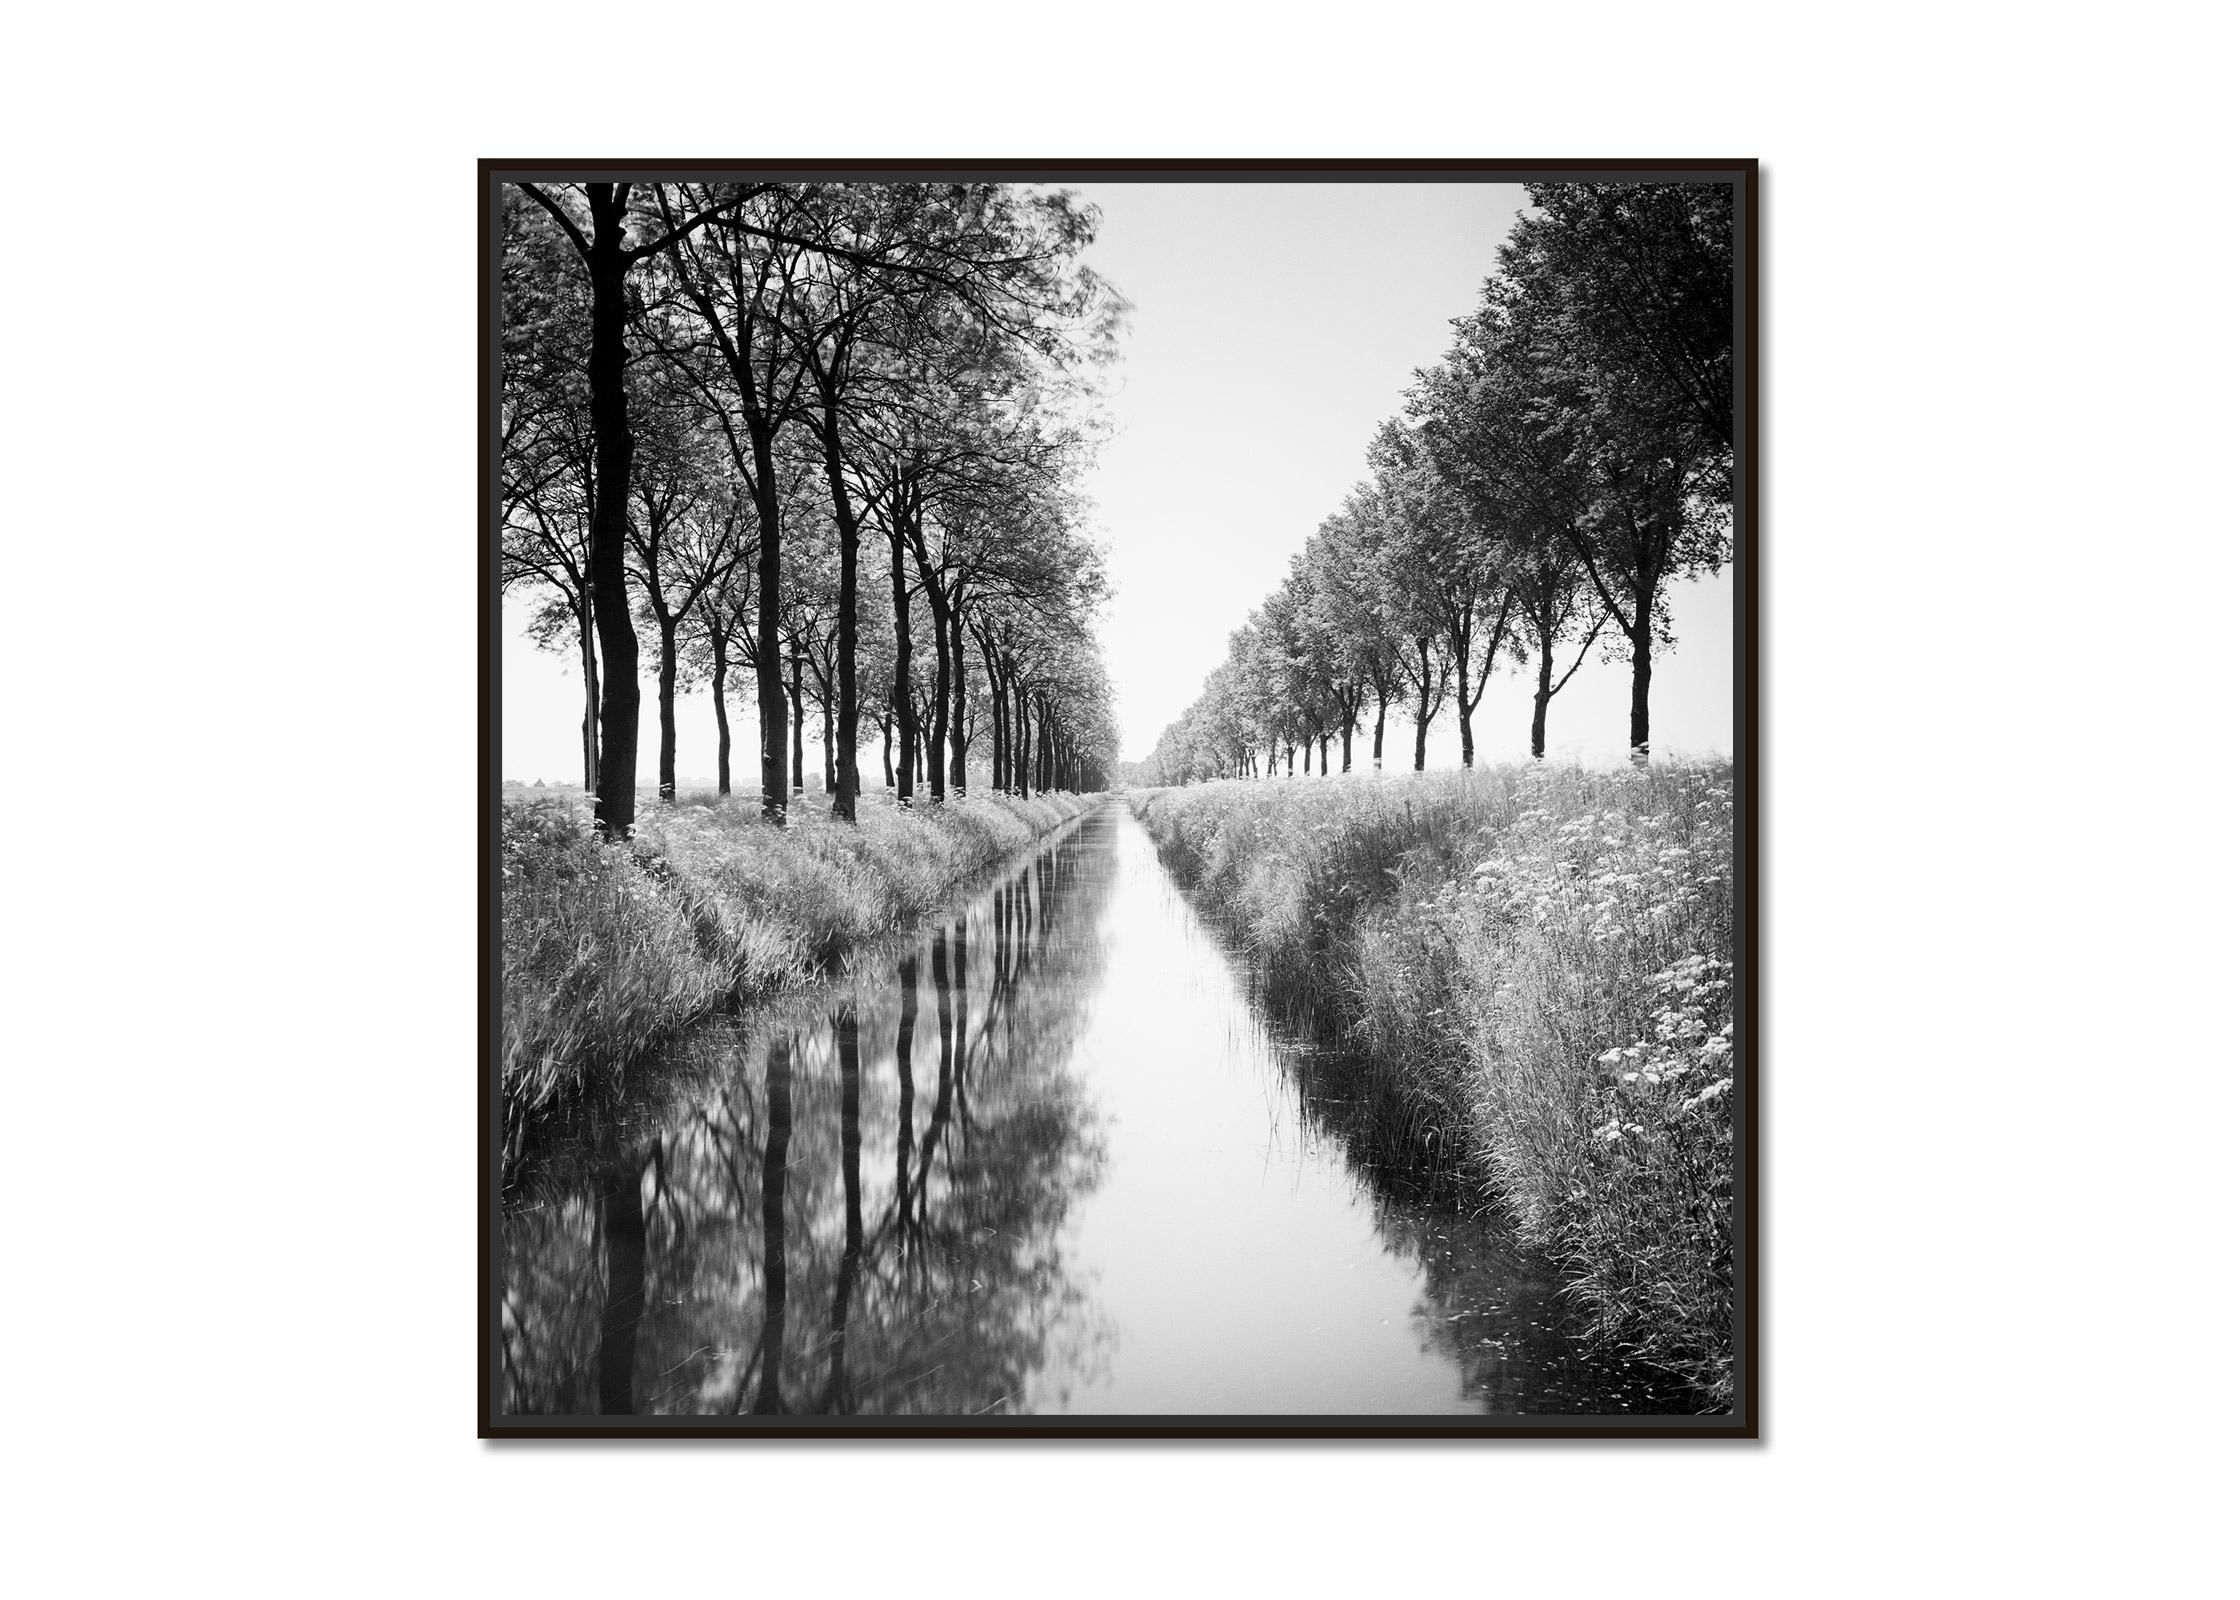 Gracht, Tree Avenue,  Netherlands, black and white photography, landscape - Photograph by Gerald Berghammer, Ina Forstinger